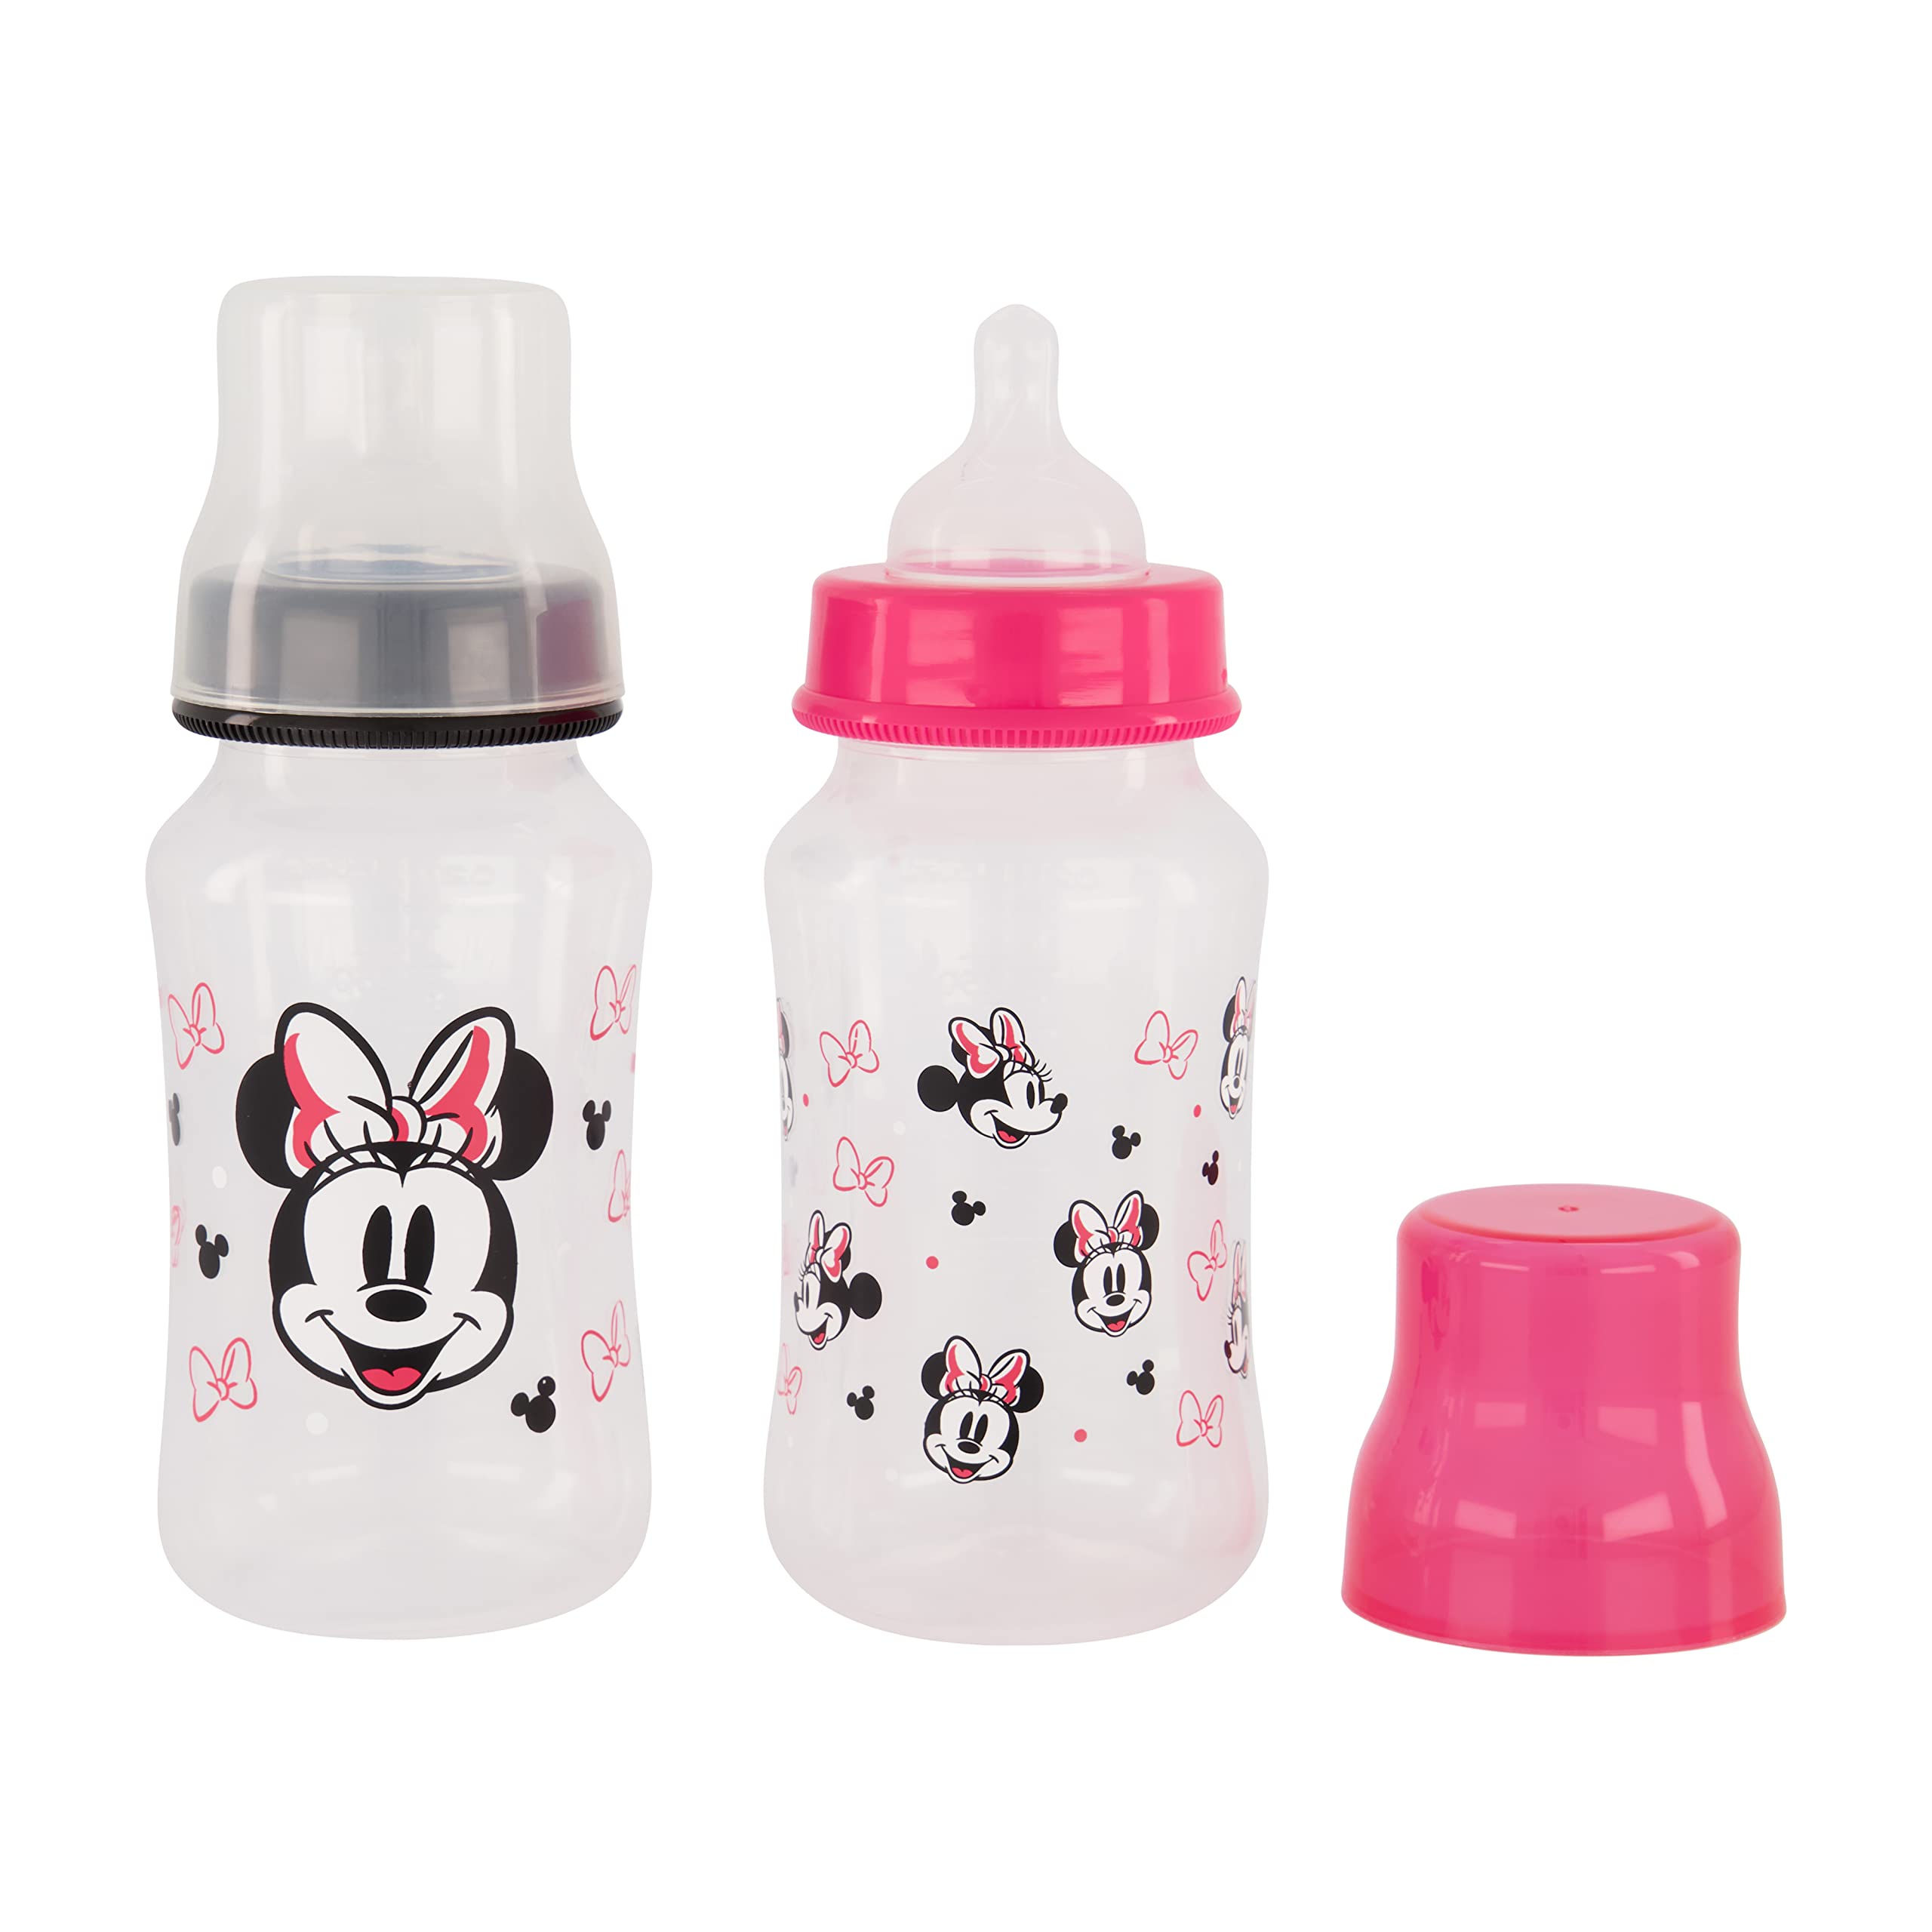 Disney Minnie Mouse Baby Bottles 11 oz for Boys or Girls, 2 Pack of Infant  Hourglass Shaped Bottles with Cover for Newborns and All Babies